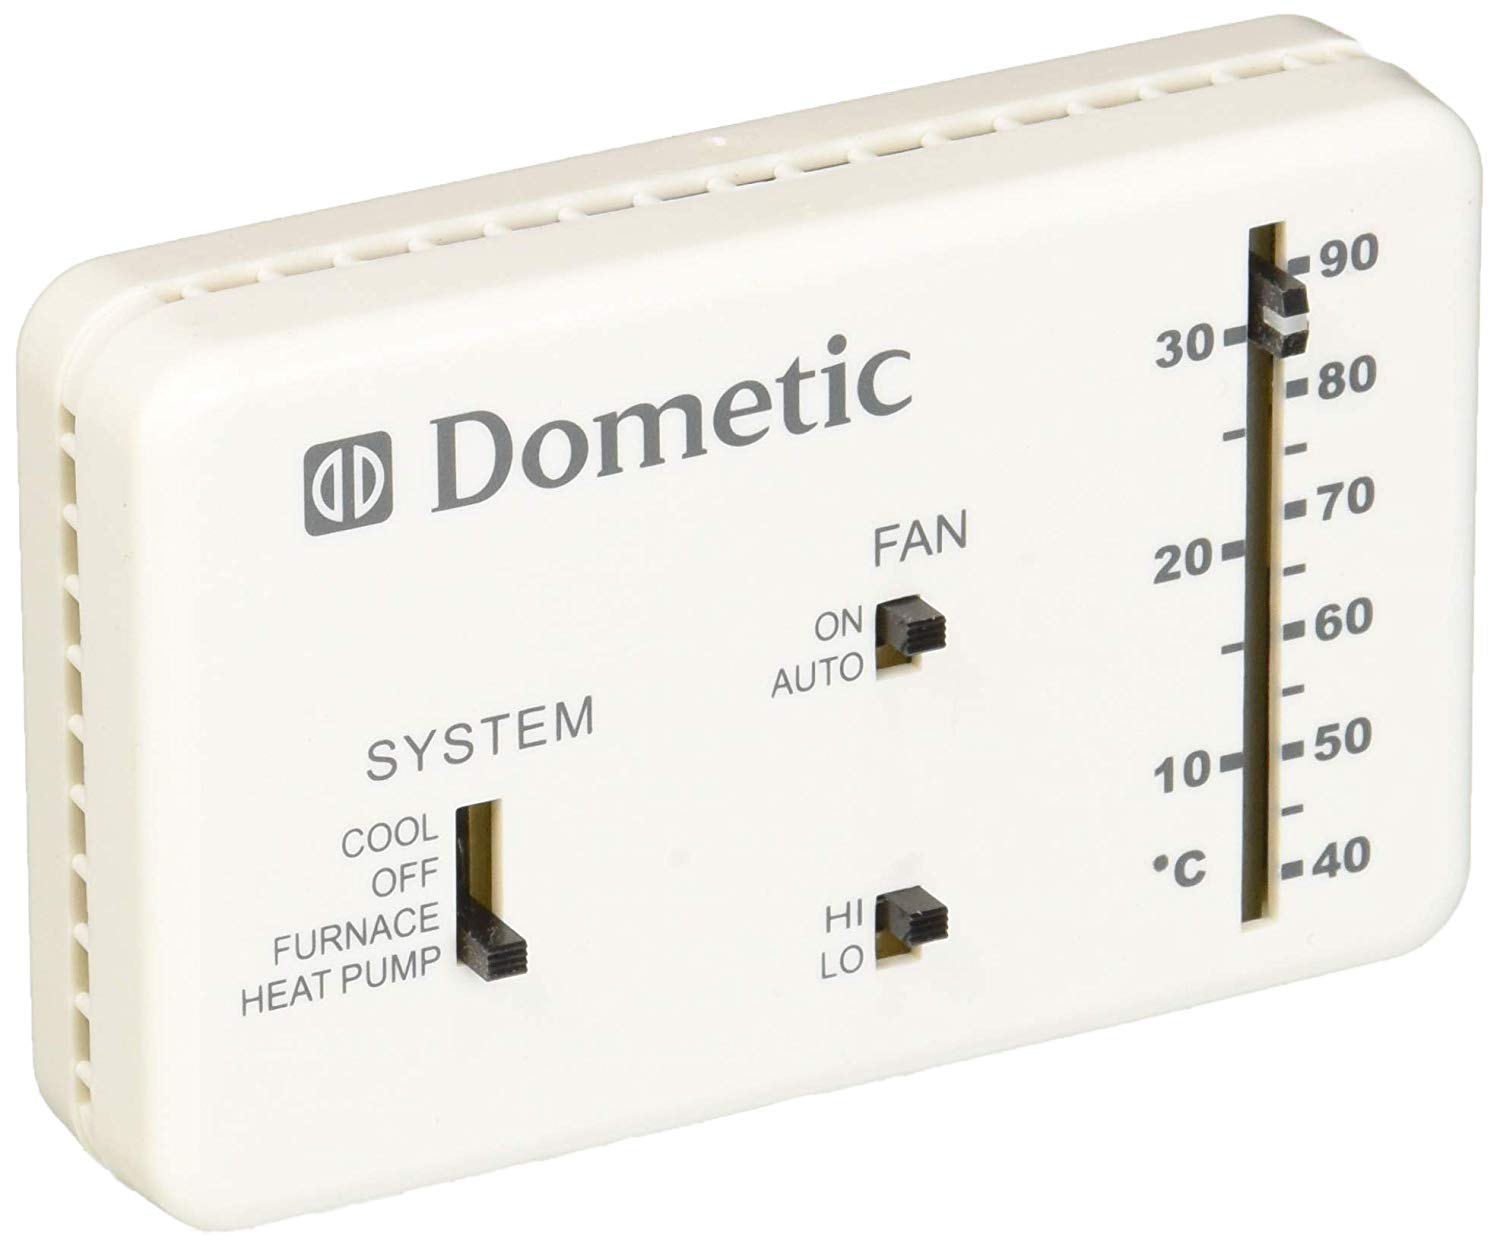 Dometic Thermostat Cool-Furnace-Heat Pump-White | 3106995.040